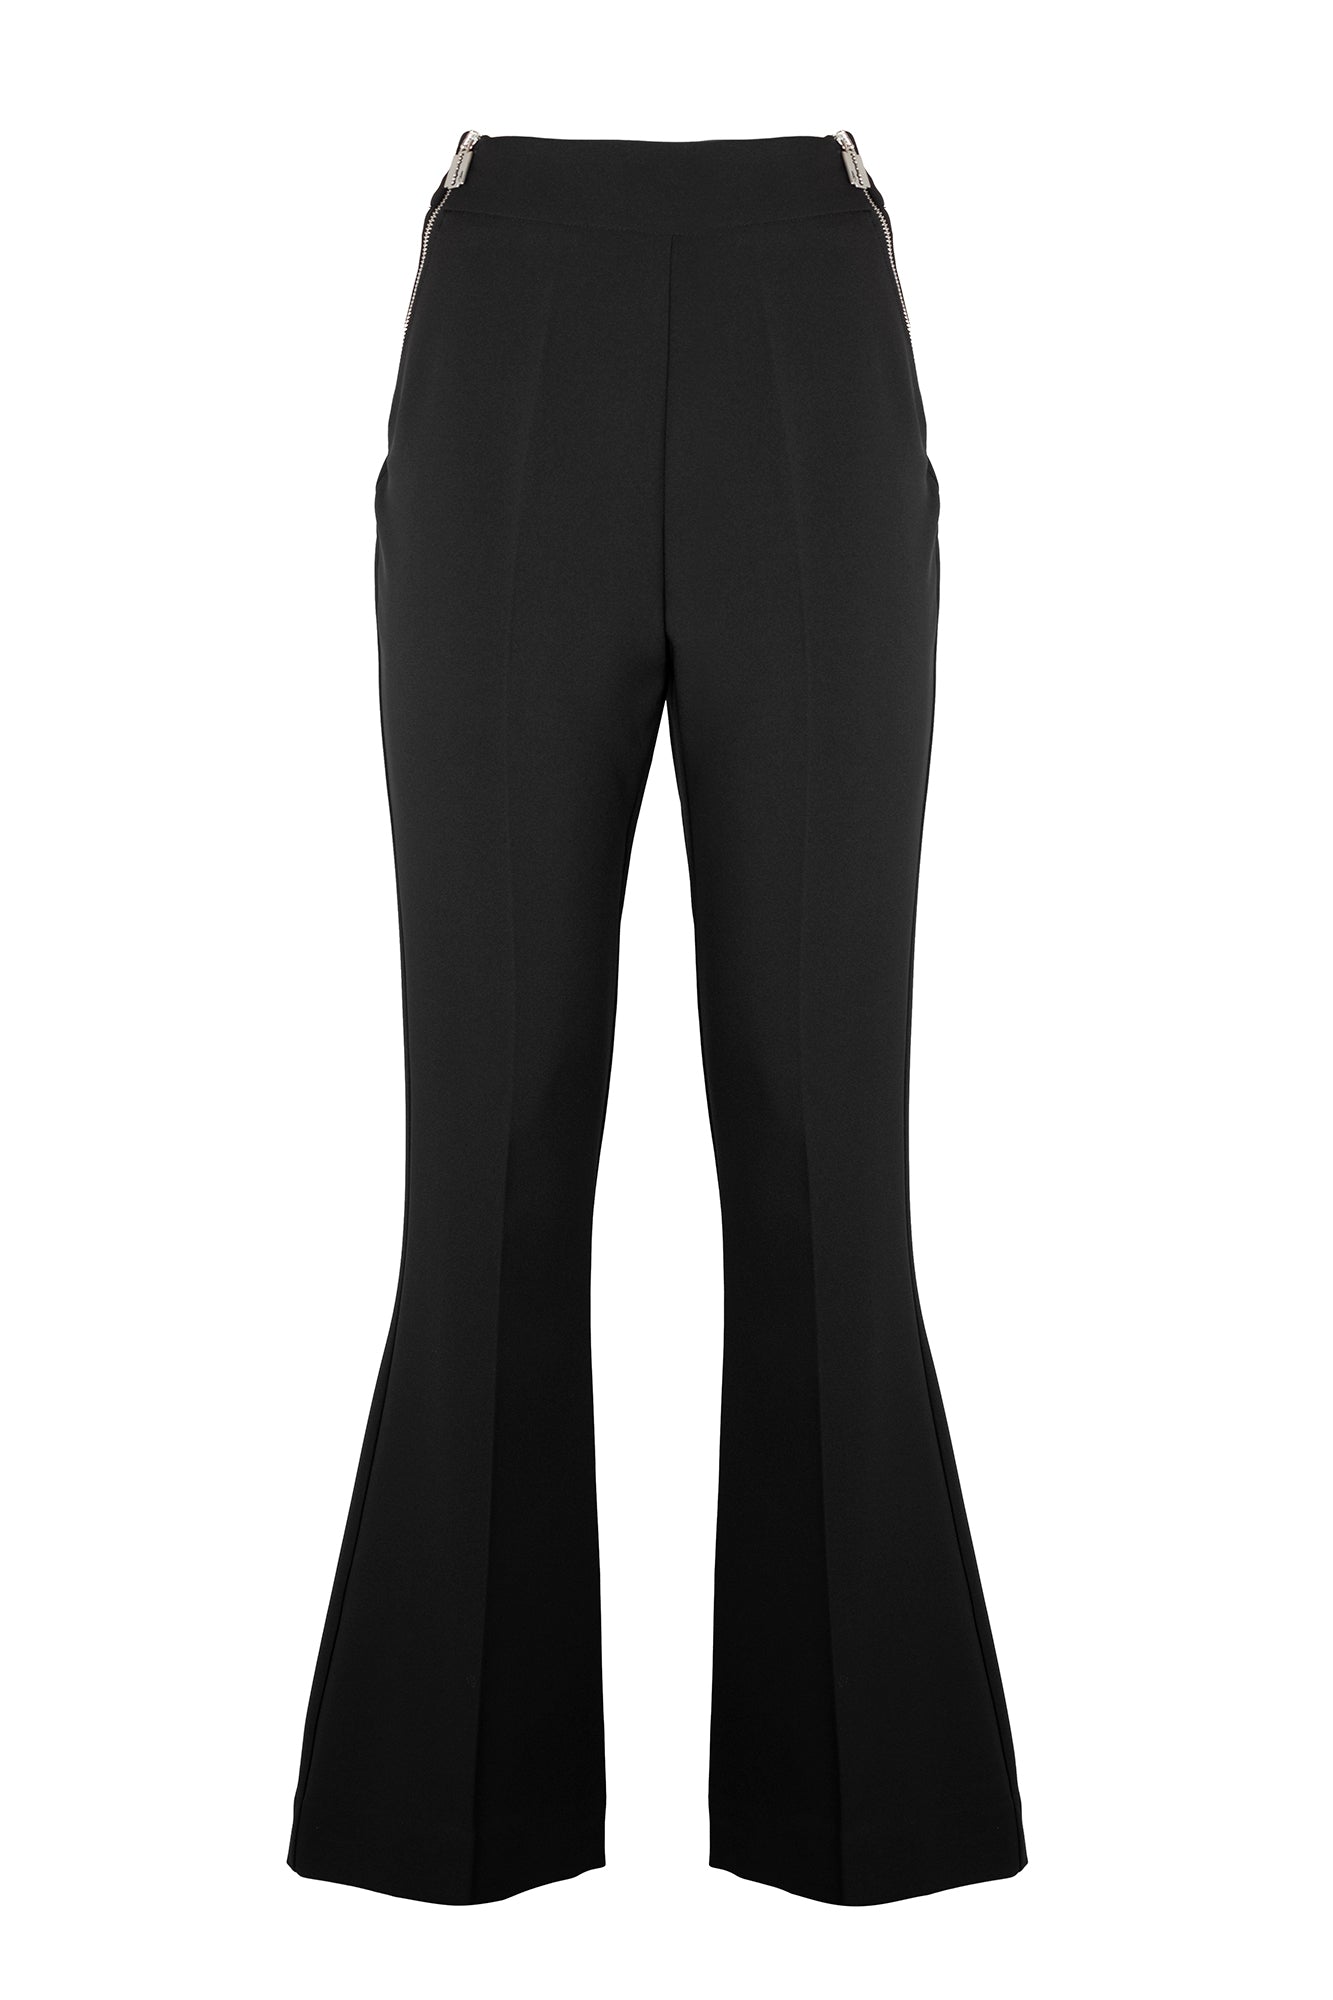 Trompette trousers with contrasting zip detail